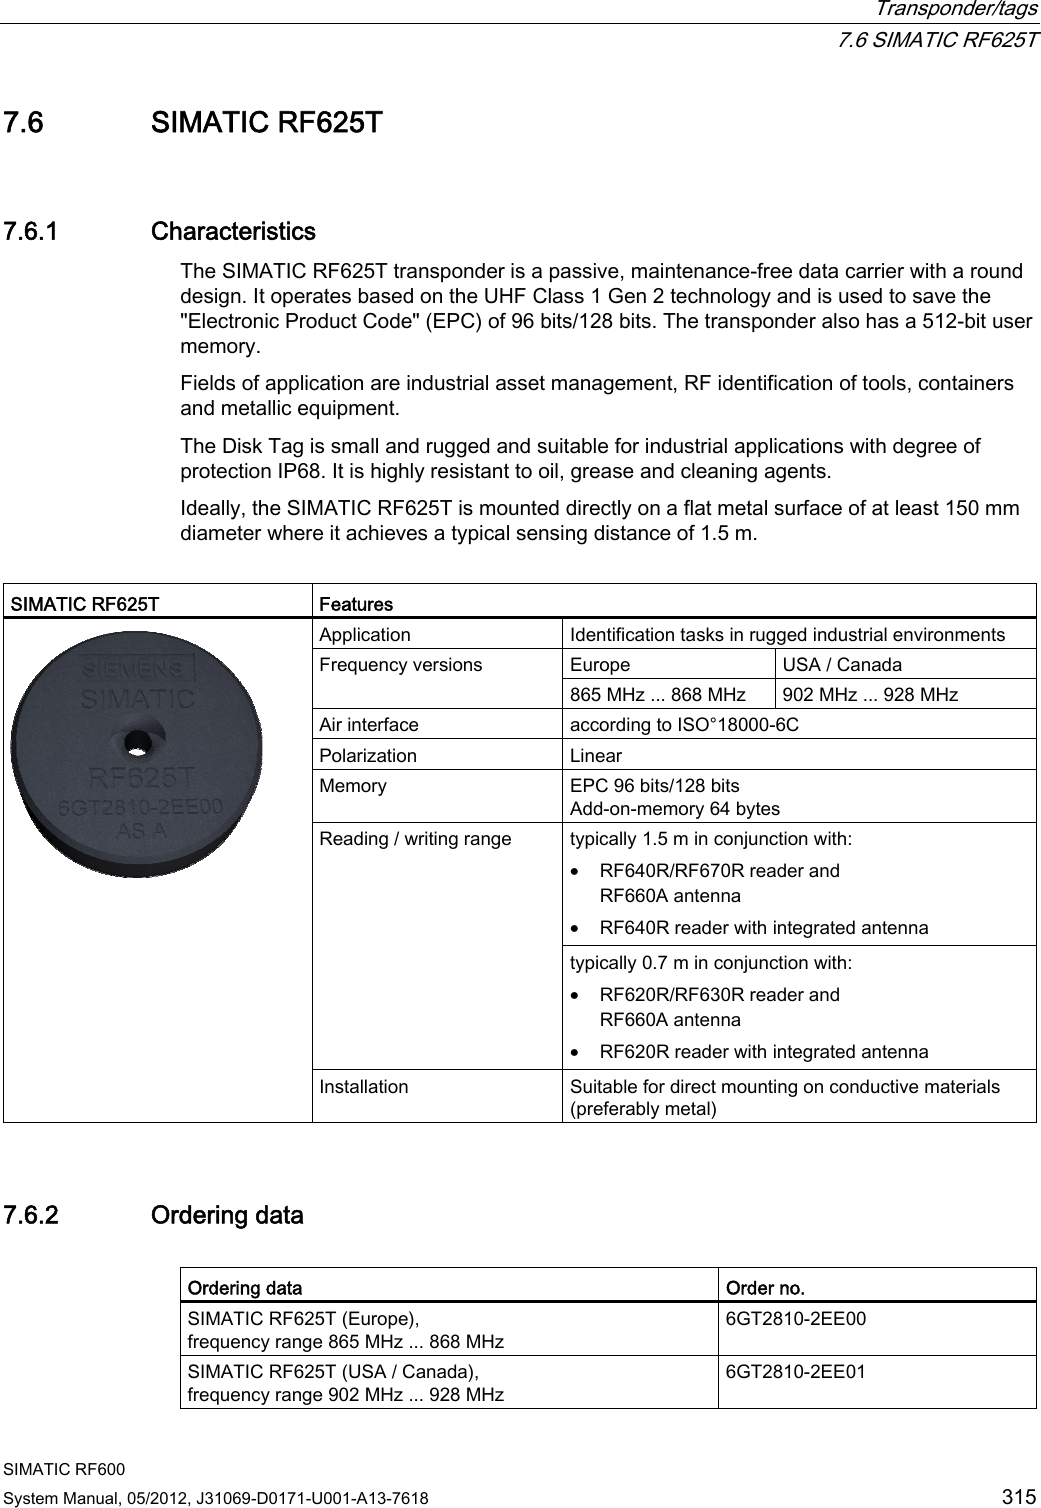  Transponder/tags  7.6 SIMATIC RF625T SIMATIC RF600 System Manual, 05/2012, J31069-D0171-U001-A13-7618  315 7.6 SIMATIC RF625T 7.6.1 Characteristics The SIMATIC RF625T transponder is a passive, maintenance-free data carrier with a round design. It operates based on the UHF Class 1 Gen 2 technology and is used to save the &quot;Electronic Product Code&quot; (EPC) of 96 bits/128 bits. The transponder also has a 512-bit user memory. Fields of application are industrial asset management, RF identification of tools, containers and metallic equipment.  The Disk Tag is small and rugged and suitable for industrial applications with degree of protection IP68. It is highly resistant to oil, grease and cleaning agents.  Ideally, the SIMATIC RF625T is mounted directly on a flat metal surface of at least 150 mm diameter where it achieves a typical sensing distance of 1.5 m.  SIMATIC RF625T  Features Application  Identification tasks in rugged industrial environments Europe  USA / Canada Frequency versions 865 MHz ... 868 MHz  902 MHz ... 928 MHz Air interface  according to ISO°18000-6C Polarization   Linear Memory  EPC 96 bits/128 bits Add-on-memory 64 bytes typically 1.5 m in conjunction with: • RF640R/RF670R reader and RF660A antenna • RF640R reader with integrated antenna Reading / writing range typically 0.7 m in conjunction with: • RF620R/RF630R reader and RF660A antenna • RF620R reader with integrated antenna  Installation  Suitable for direct mounting on conductive materials (preferably metal) 7.6.2 Ordering data  Ordering data  Order no. SIMATIC RF625T (Europe), frequency range 865 MHz ... 868 MHz 6GT2810-2EE00 SIMATIC RF625T (USA / Canada), frequency range 902 MHz ... 928 MHz 6GT2810-2EE01 